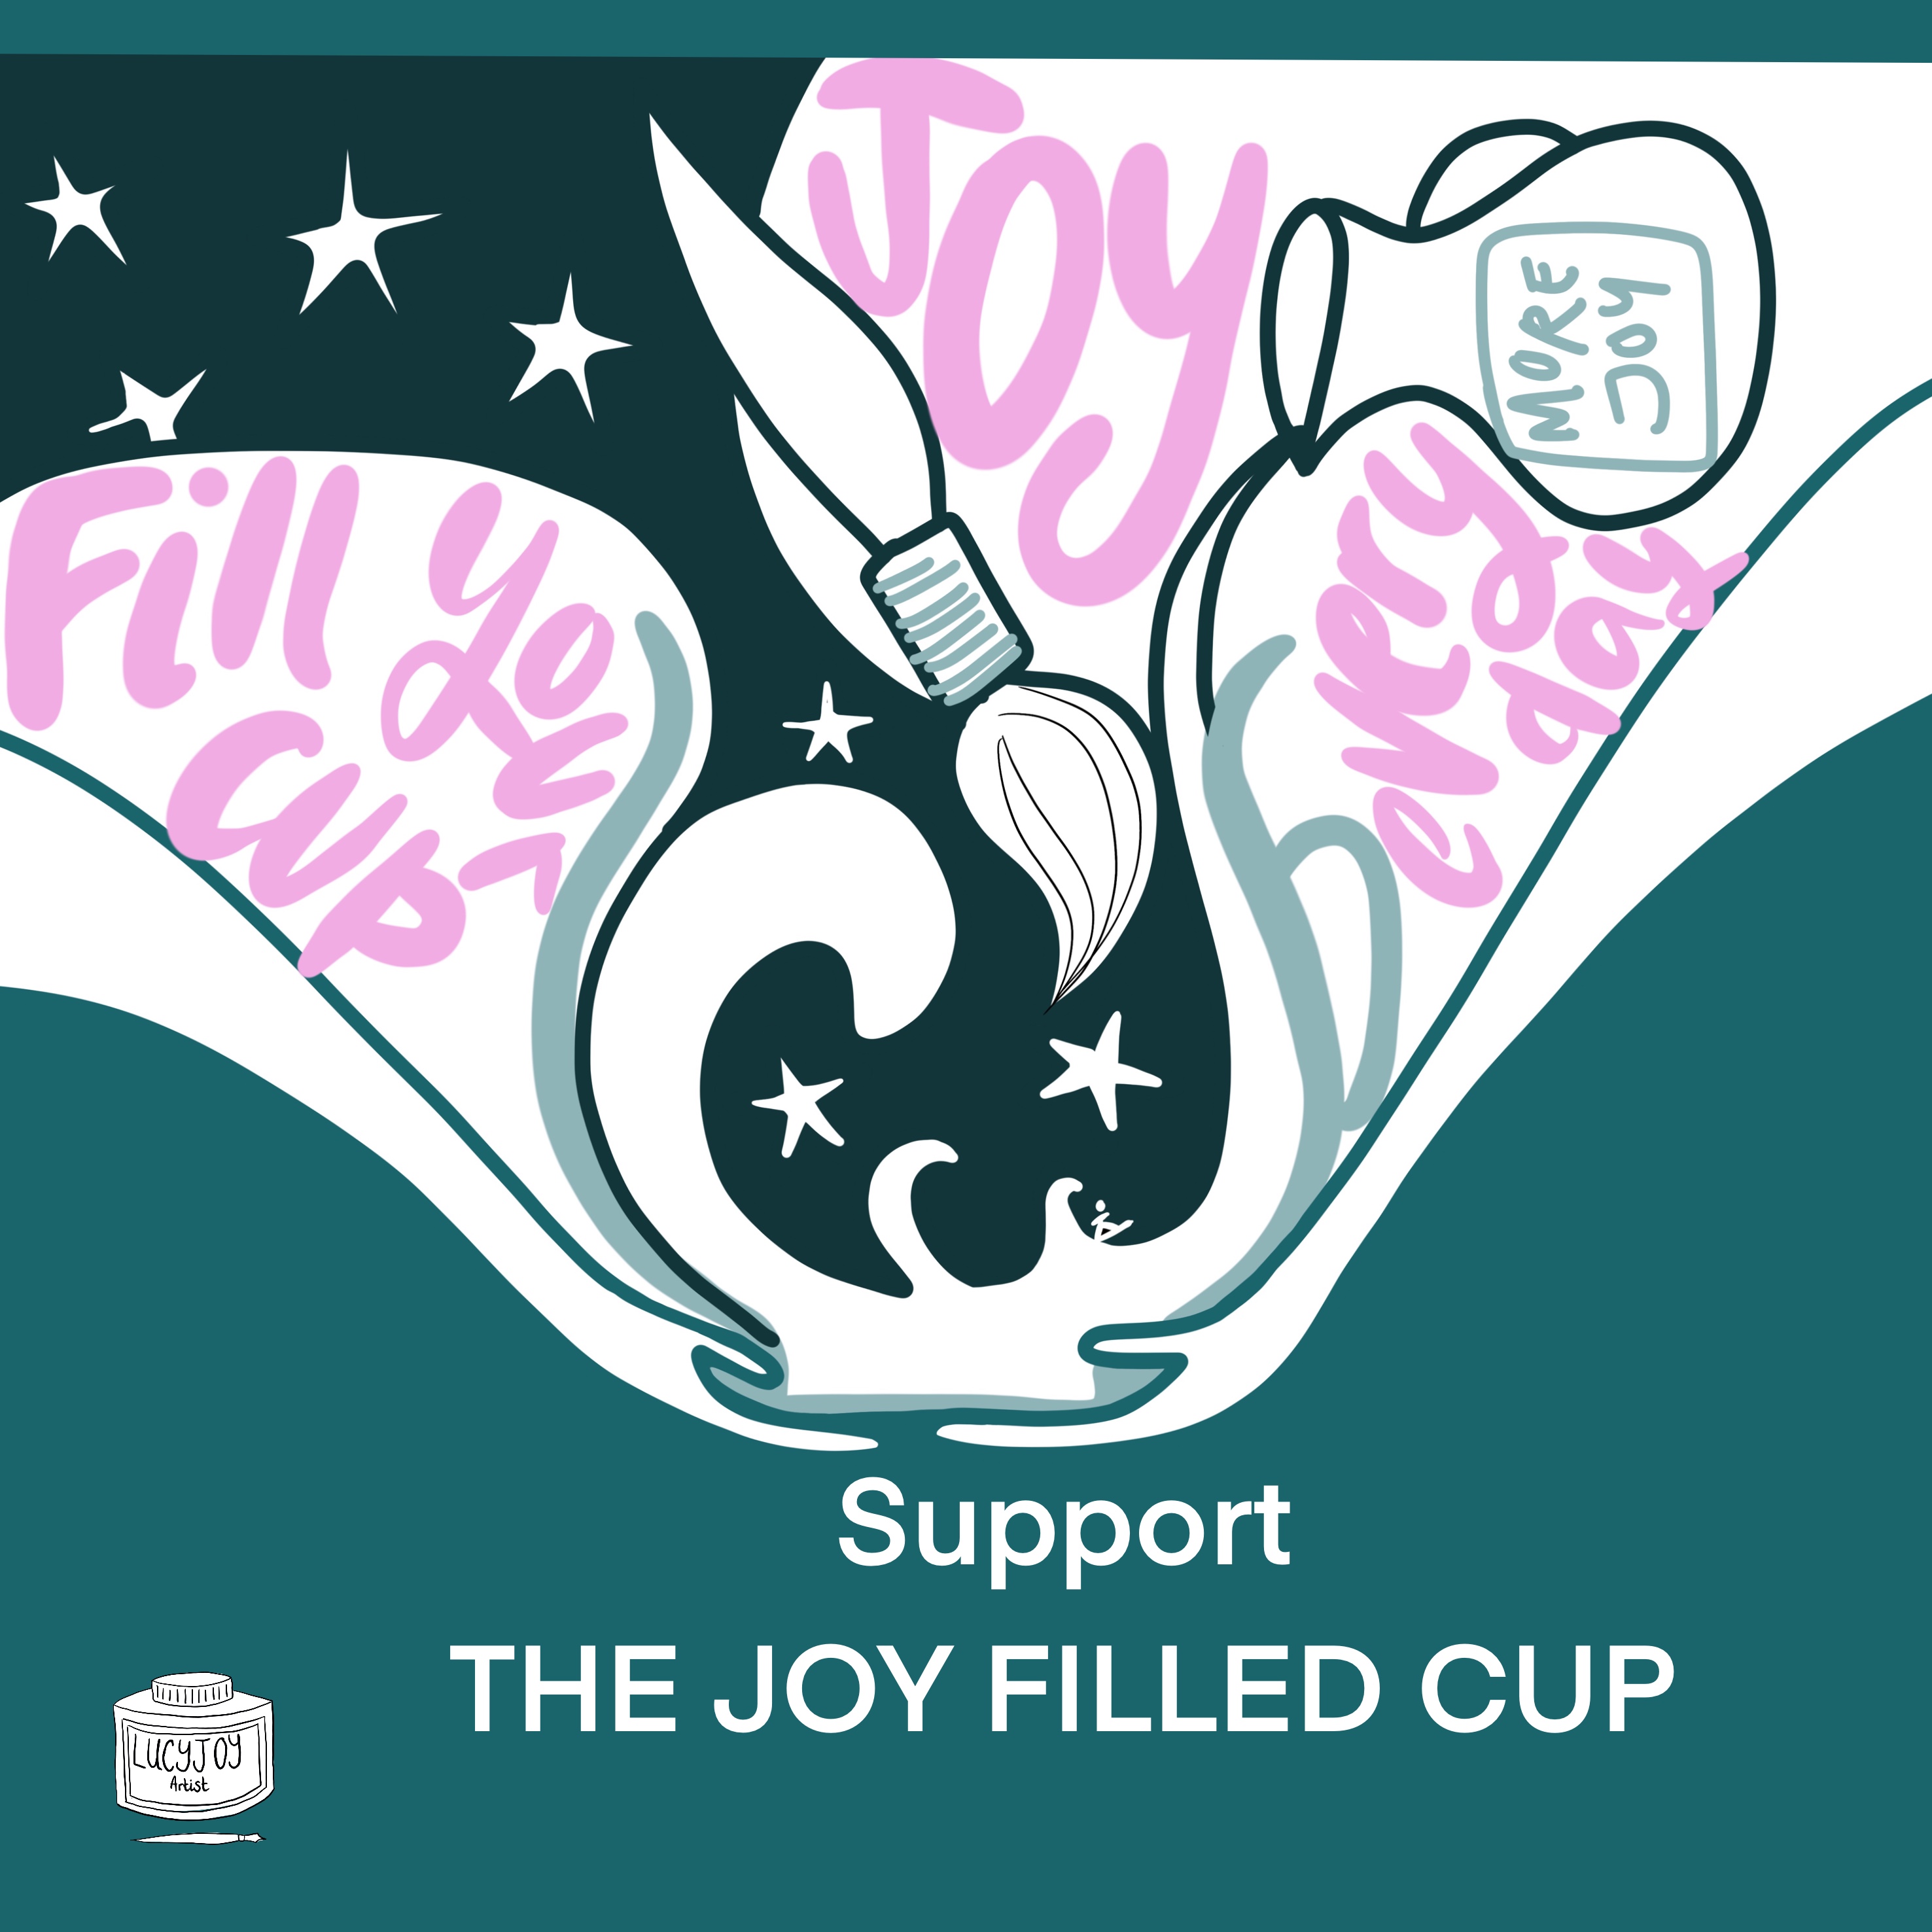 The joy filled cup image and the words support the joy filled cup